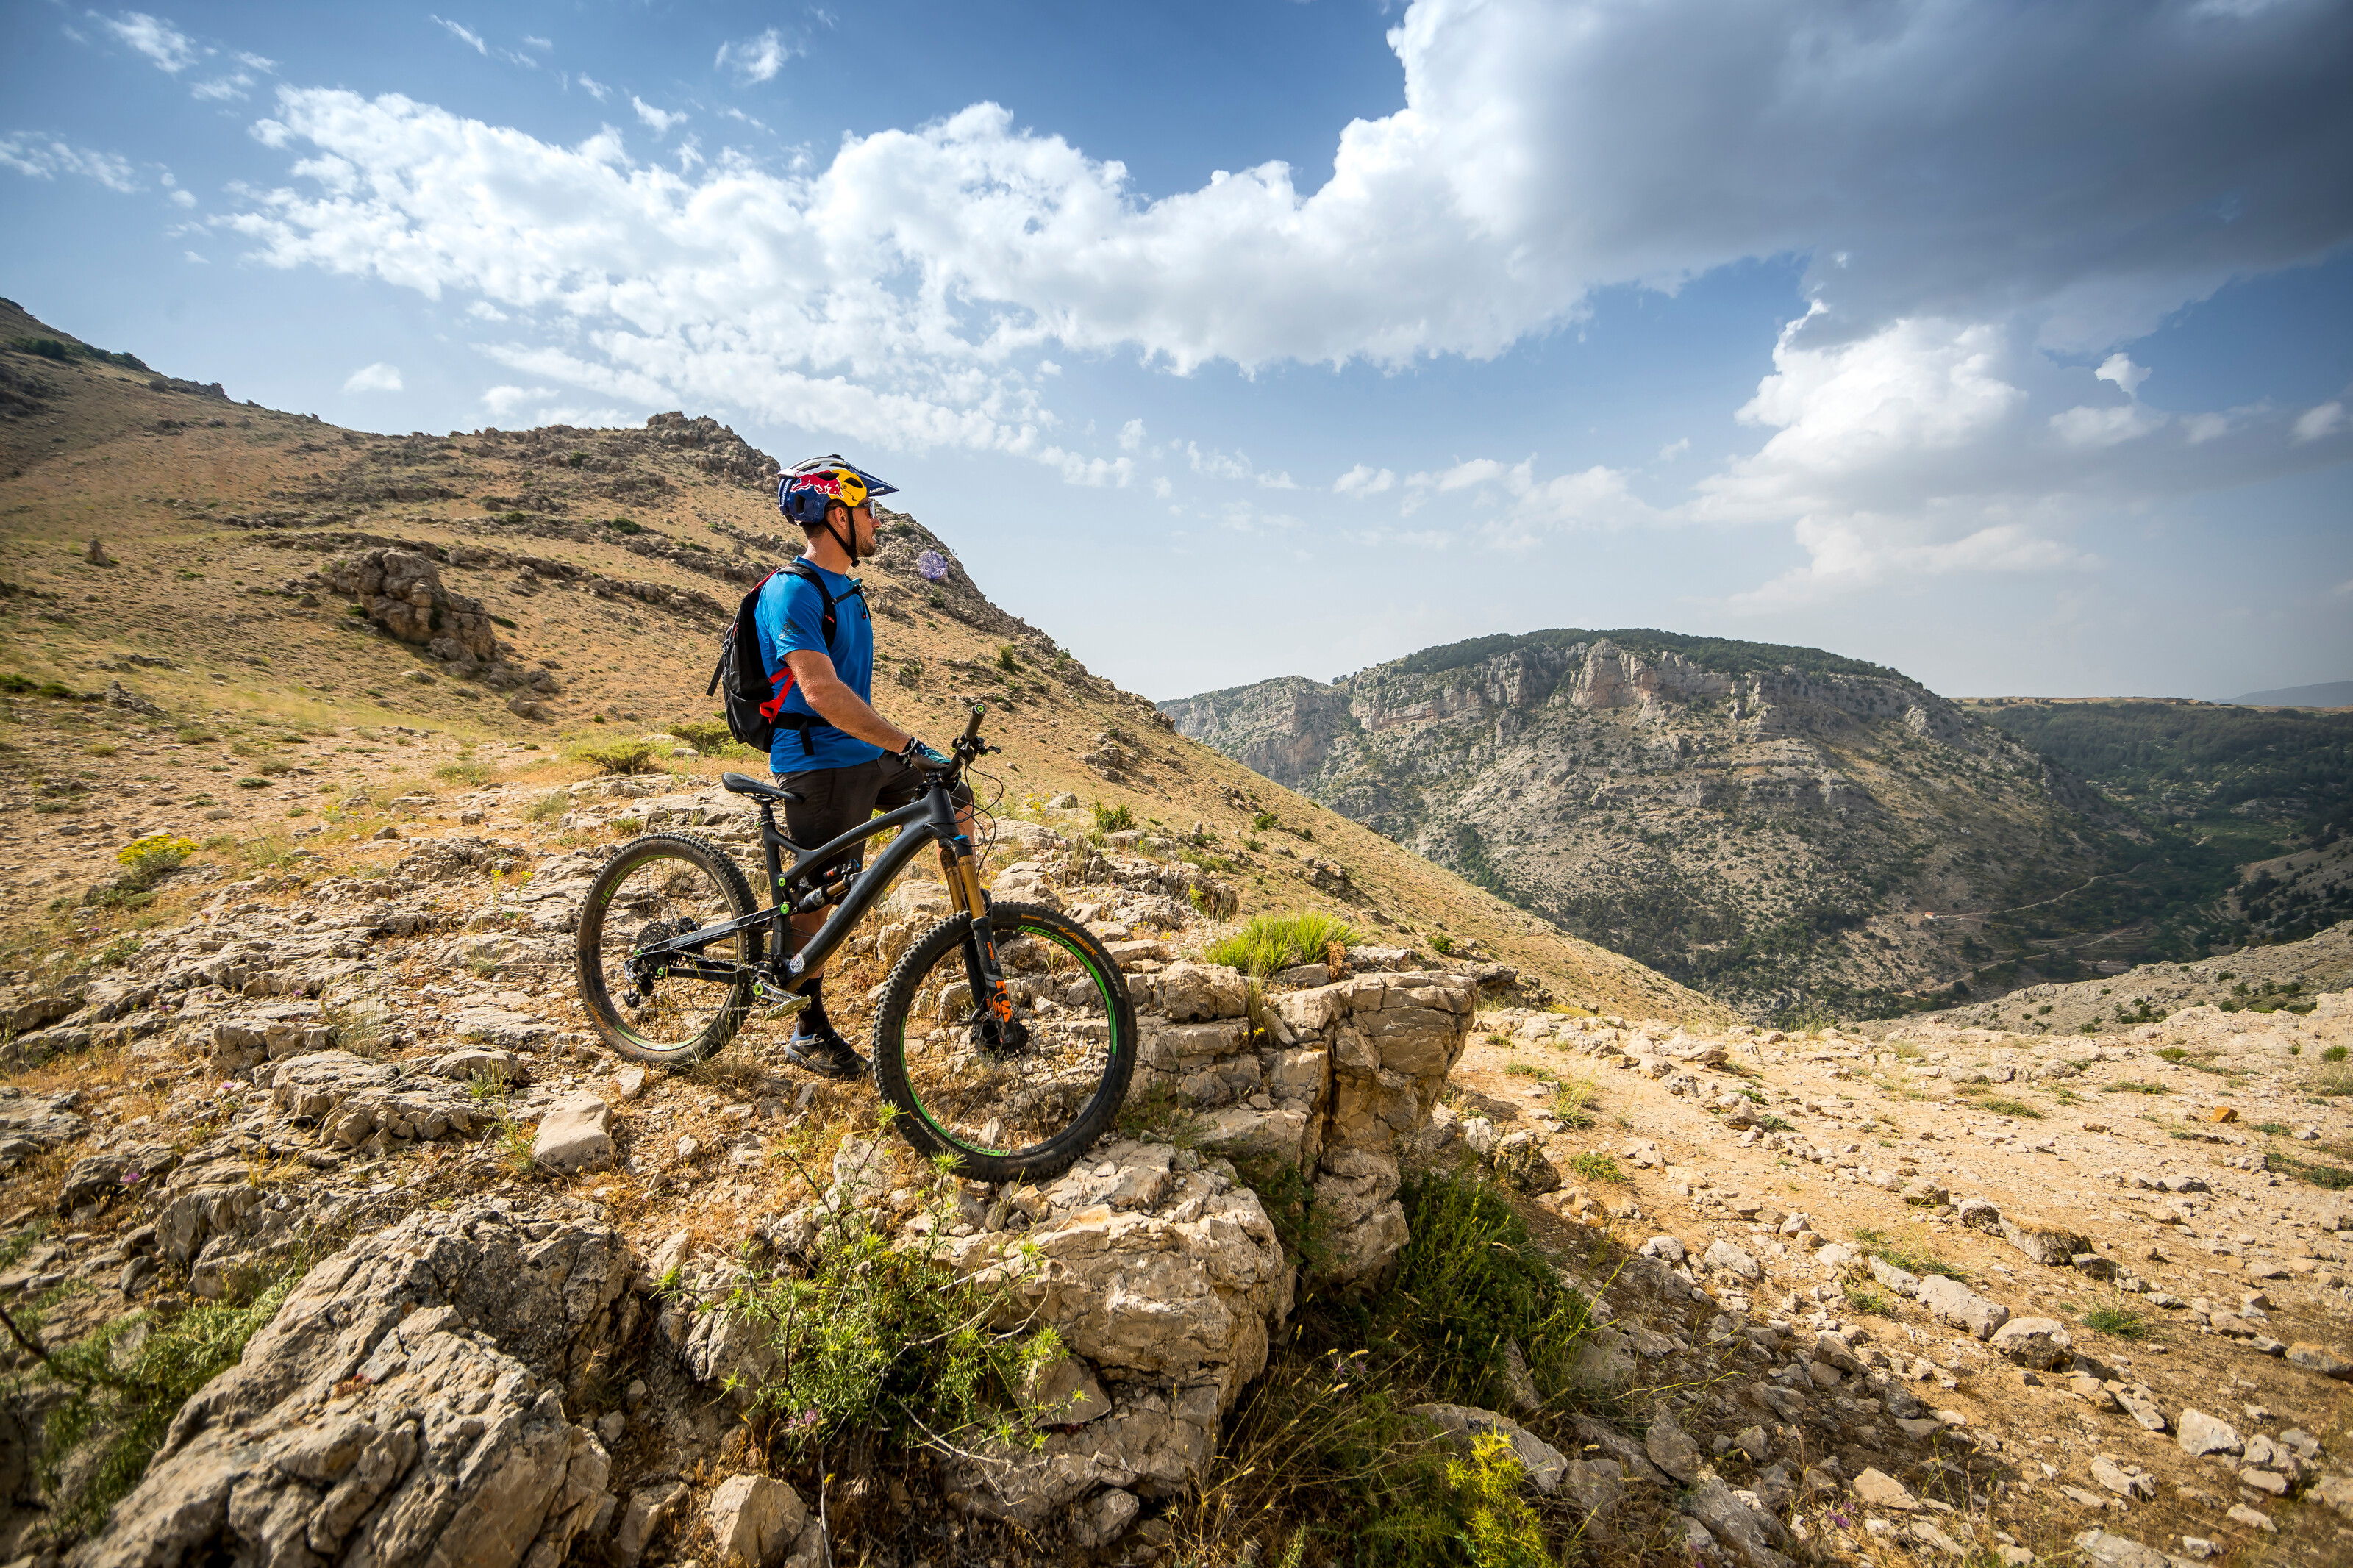 Kenny Belaey poses during filming Border to Border in Tannourine, Lebanon
Credit: Christophe Akiki/Red Bull Content PoolAppreciating the wonder
​